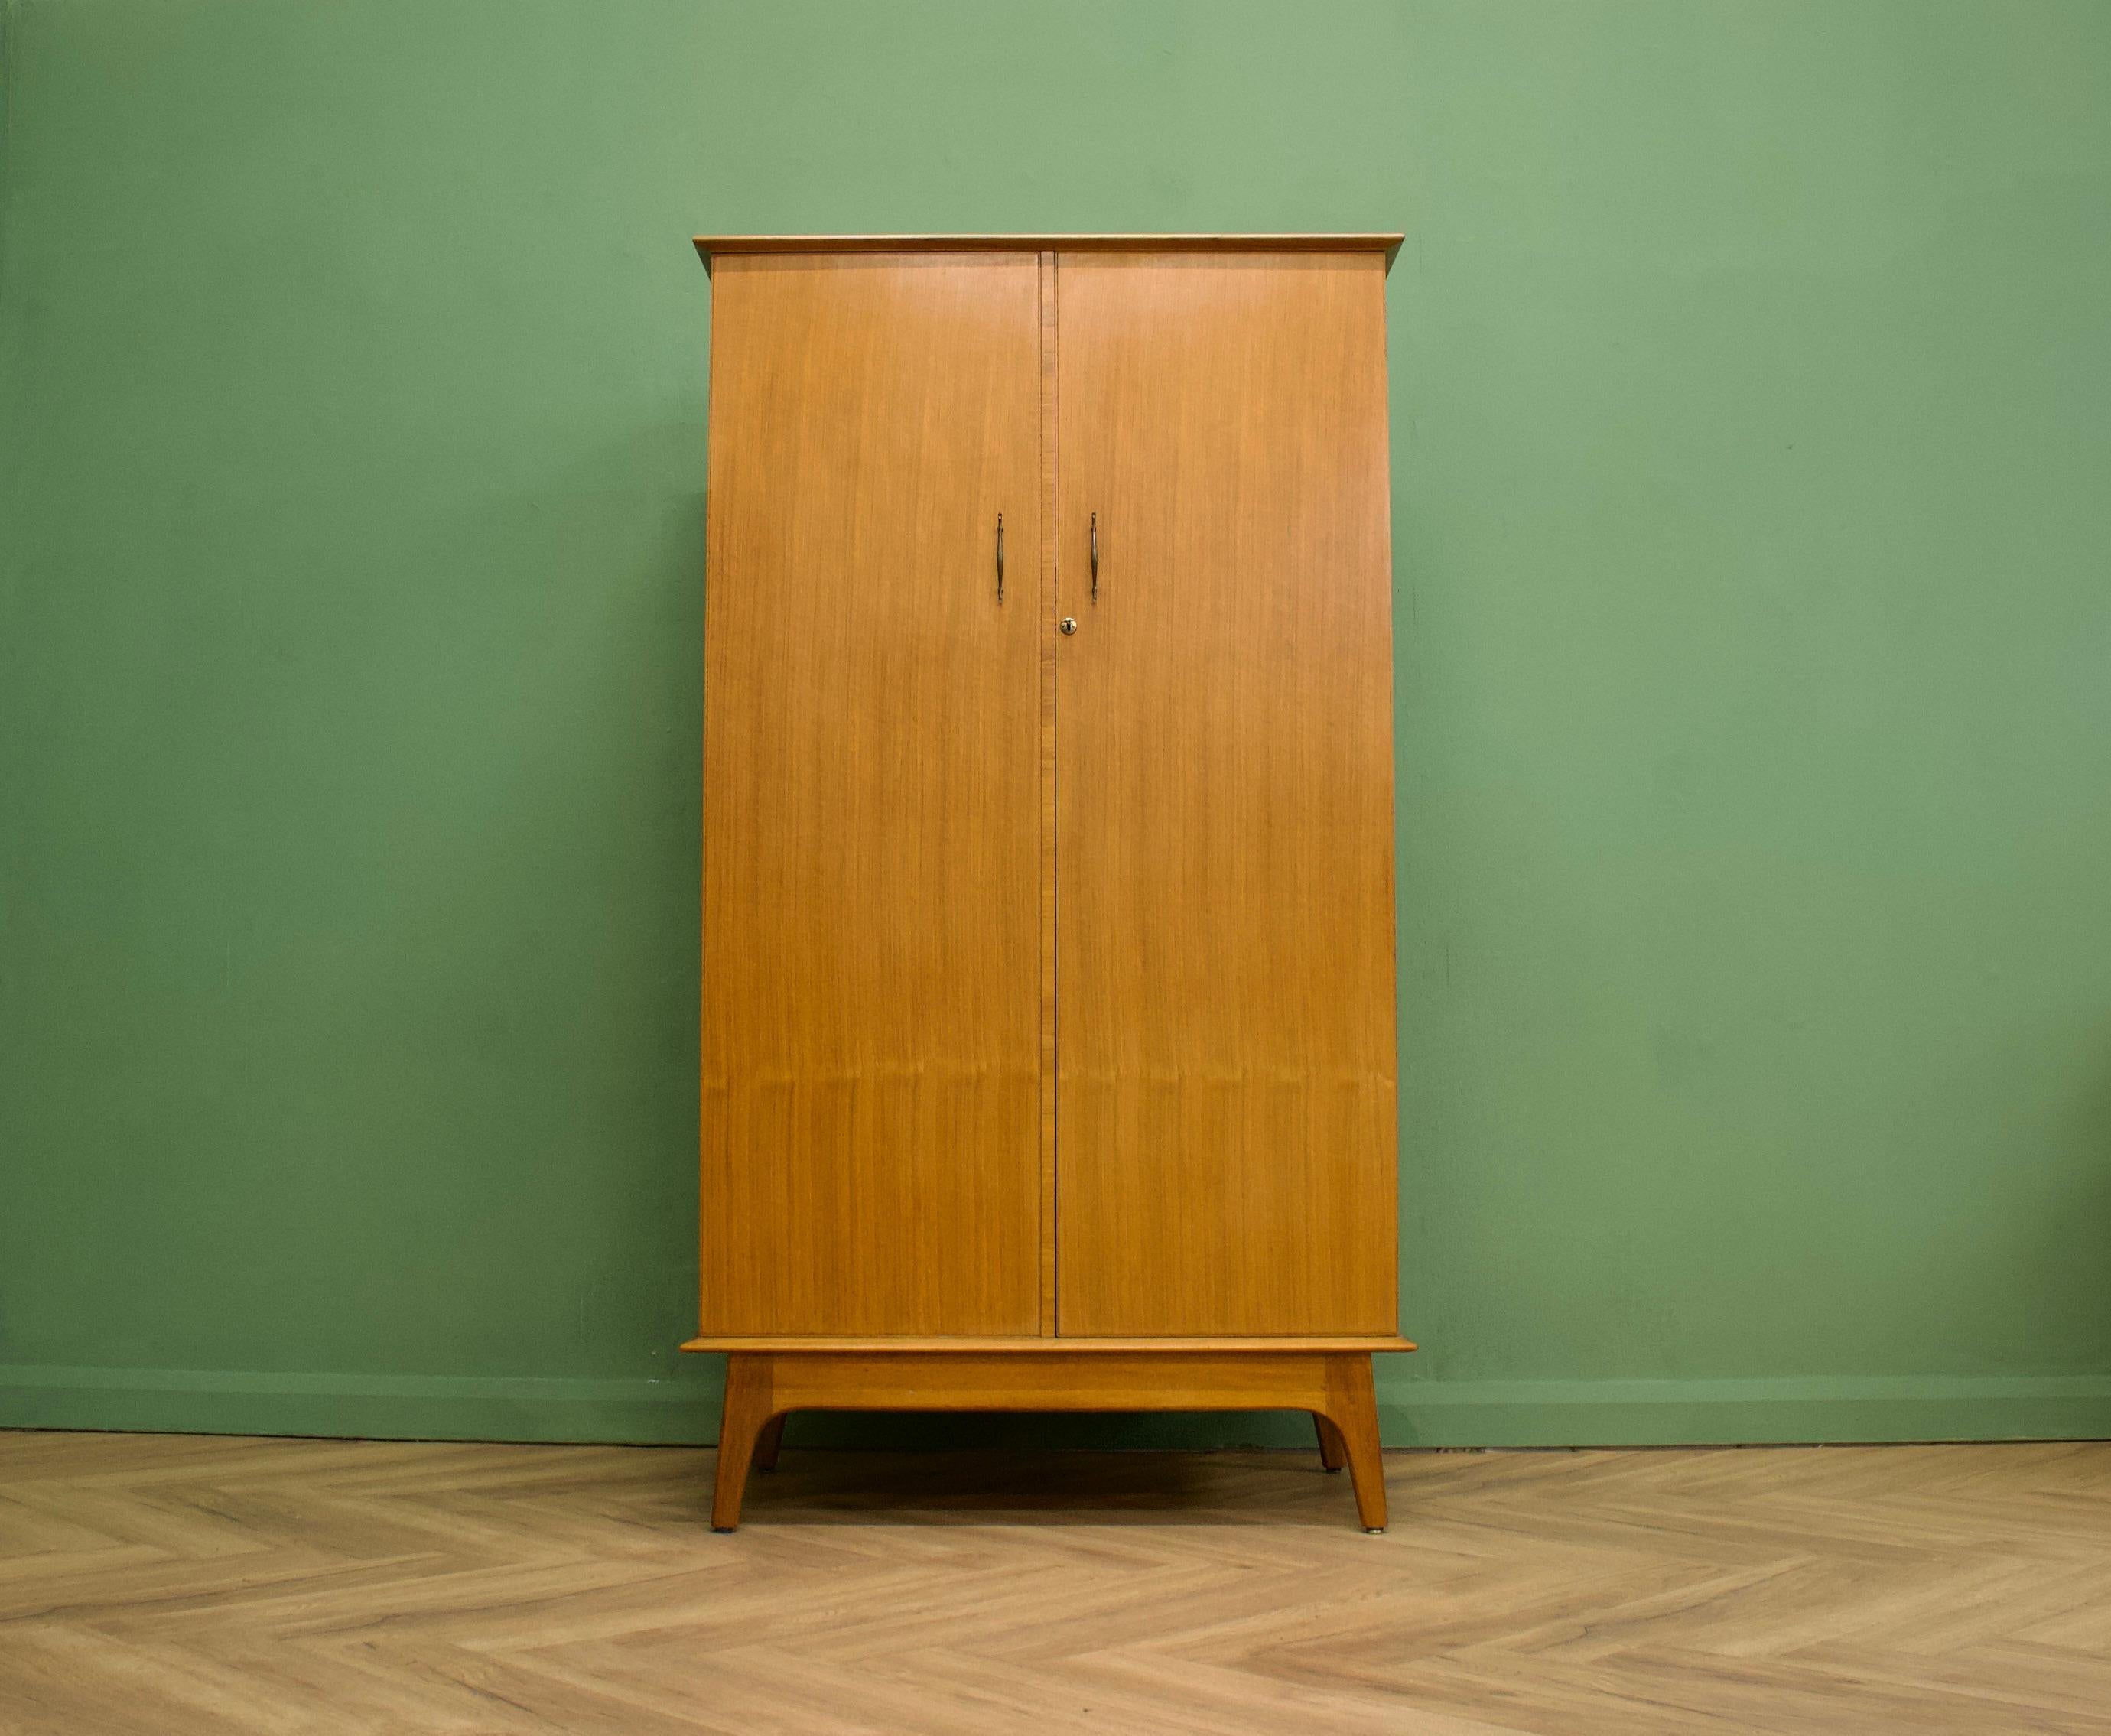 A walnut freestanding wardrobe by Alfred Cox - these pieces were almost always retailed through Heals department store during the 1950s and 1960s
Internally there are two hanging rails, shelves and a drawer
The attractive legs are splayed and the